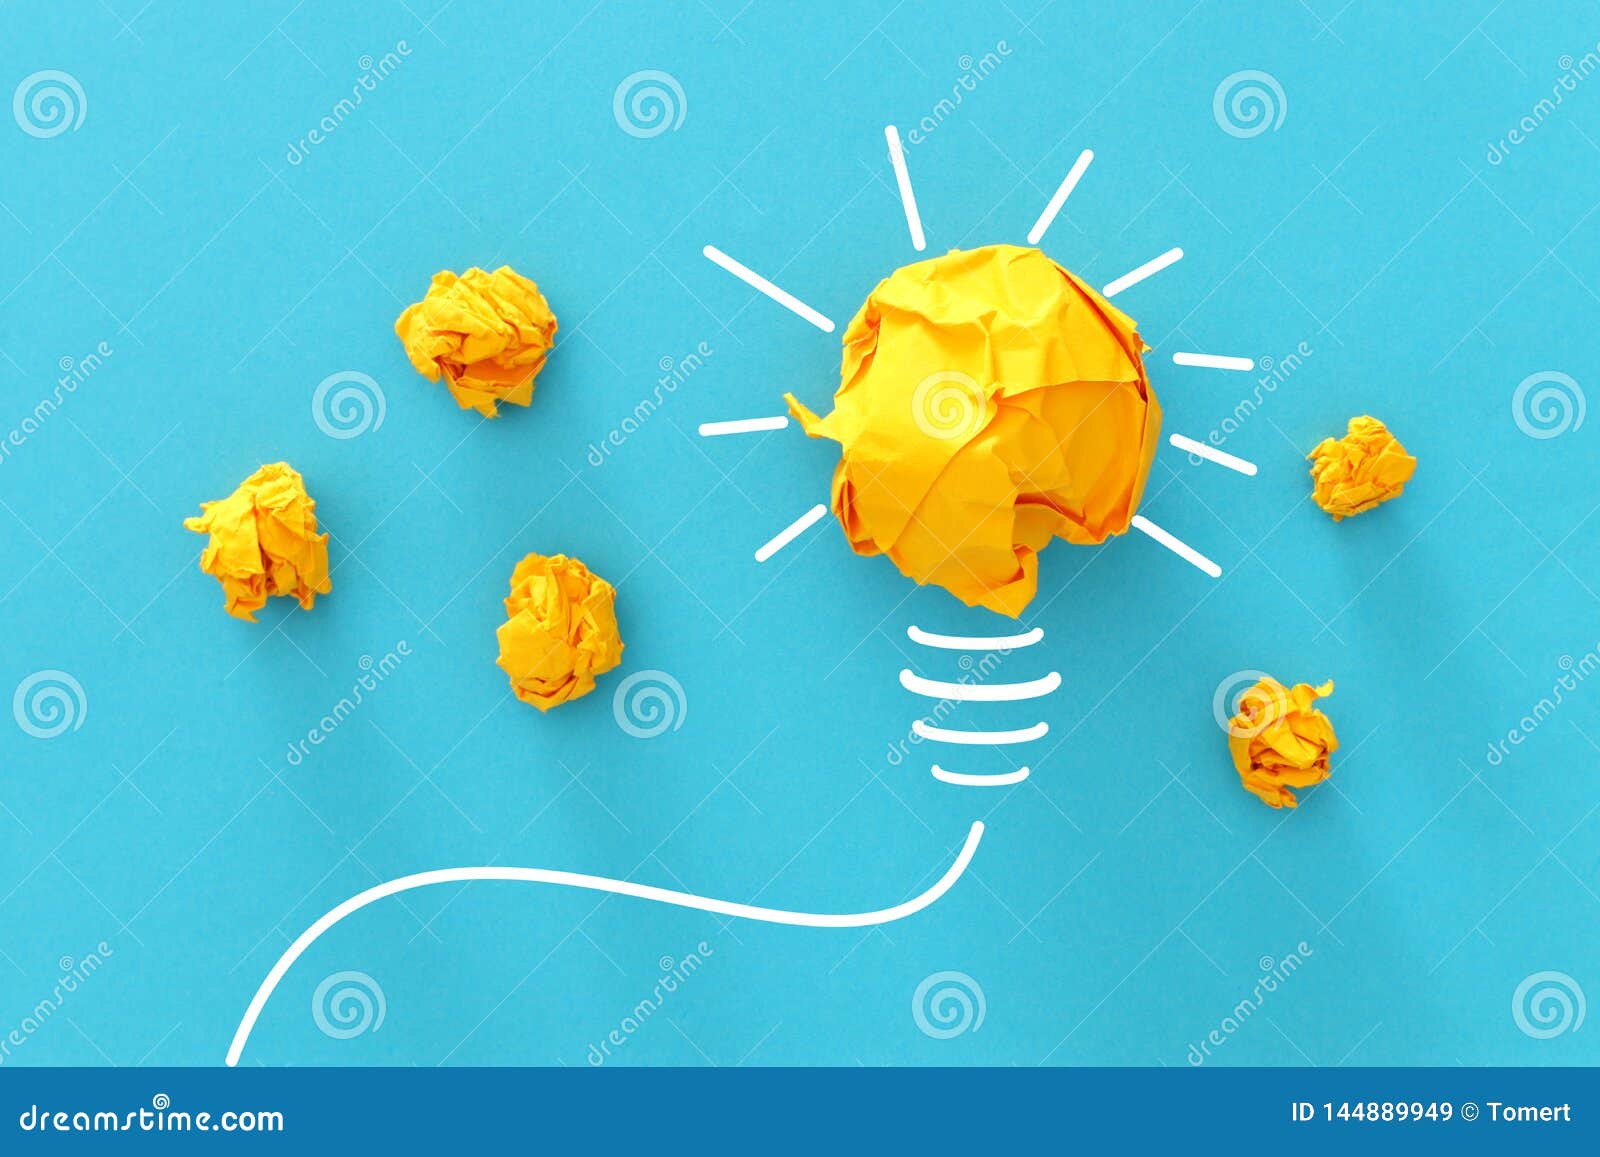 concept image of successful idea, crumpled paper and light bulb sketch, brainstorming and creative thinking